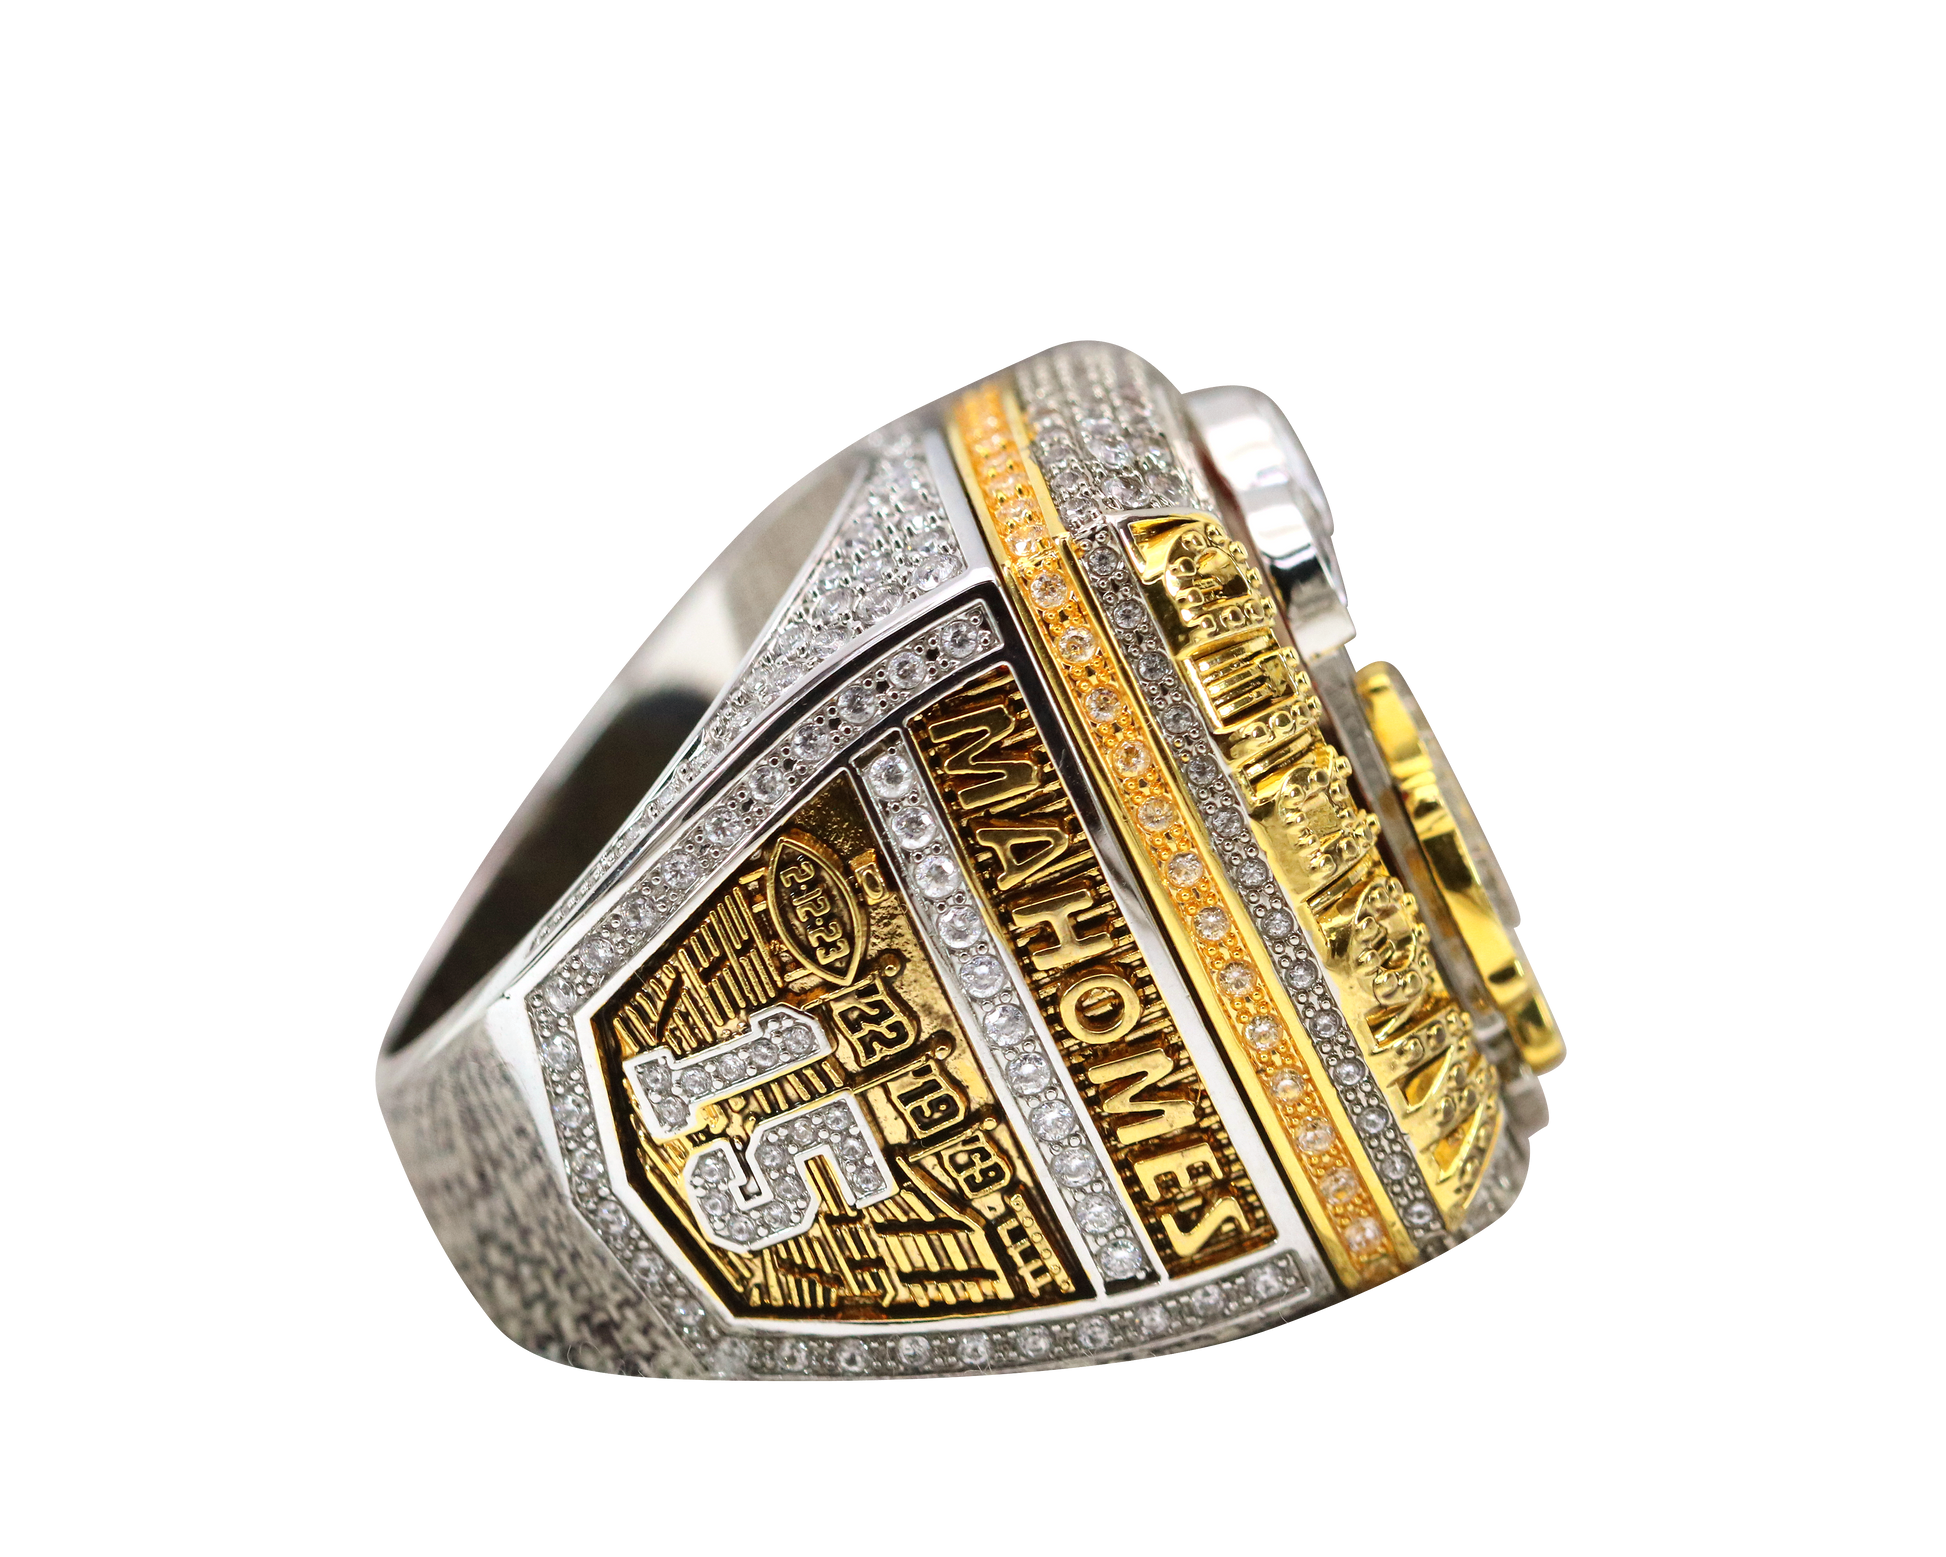 When will Mahomes and Chiefs receive their 2023 Super Bowl championship  rings? - AS USA